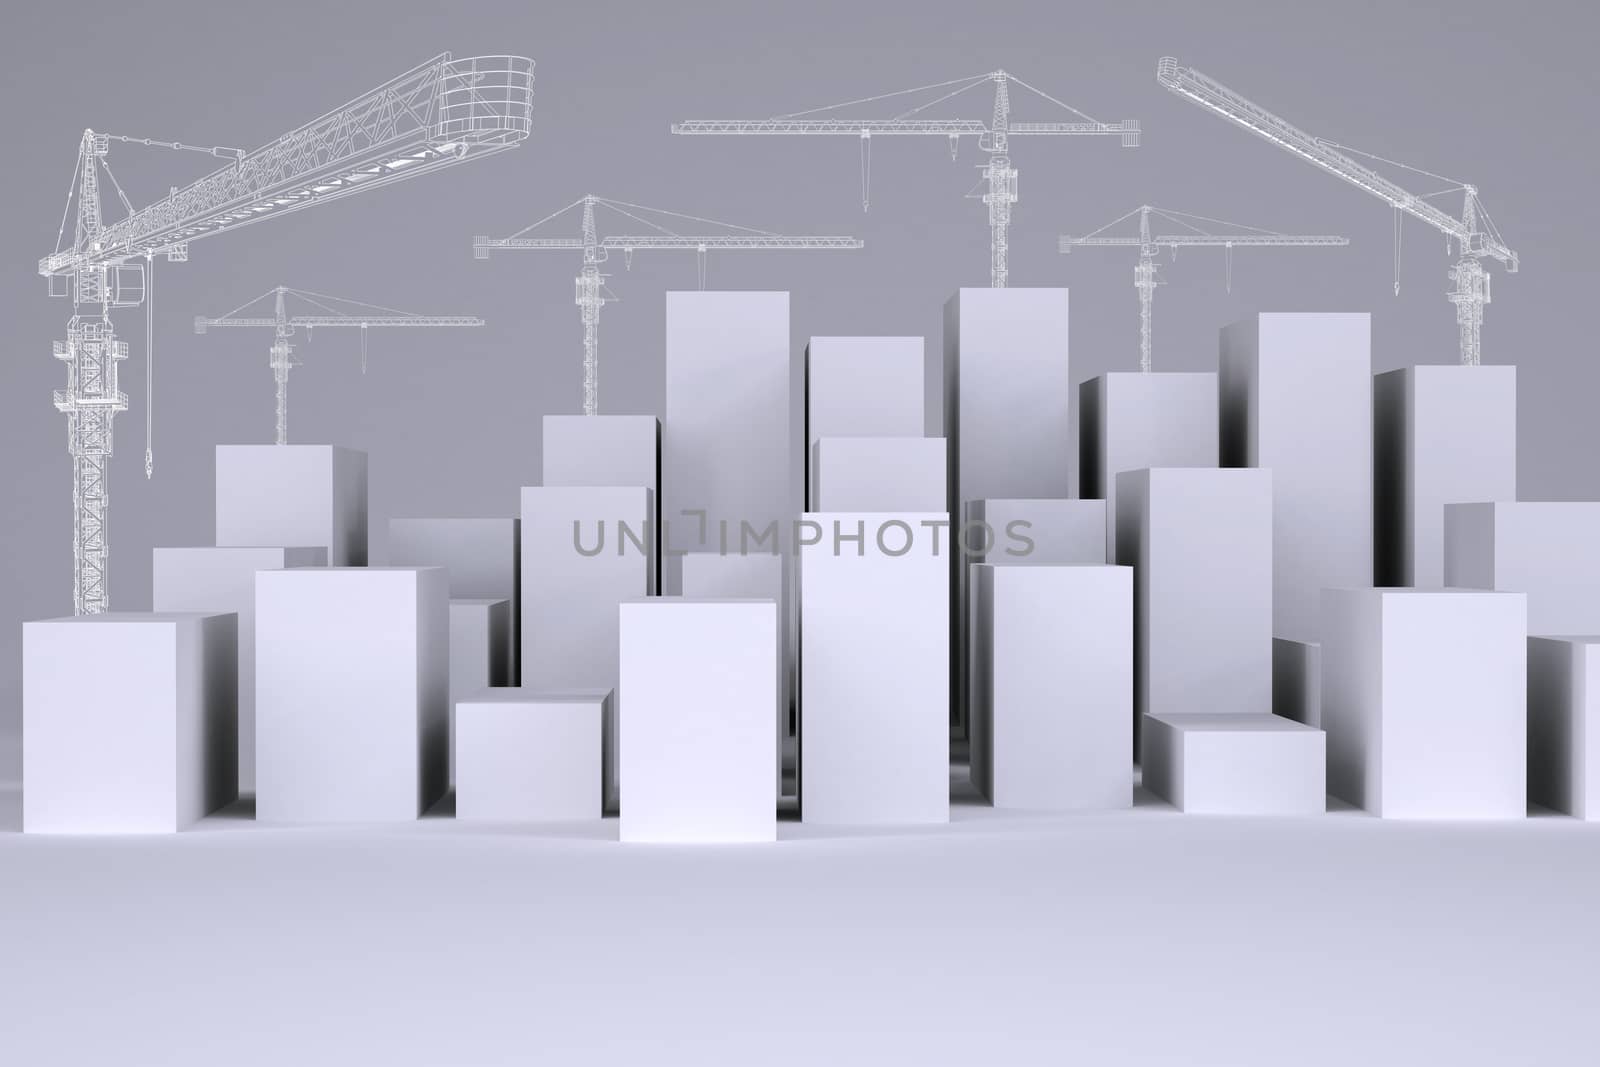 White cubes with wire-frame tower cranes on gray background. Concept of urban construction